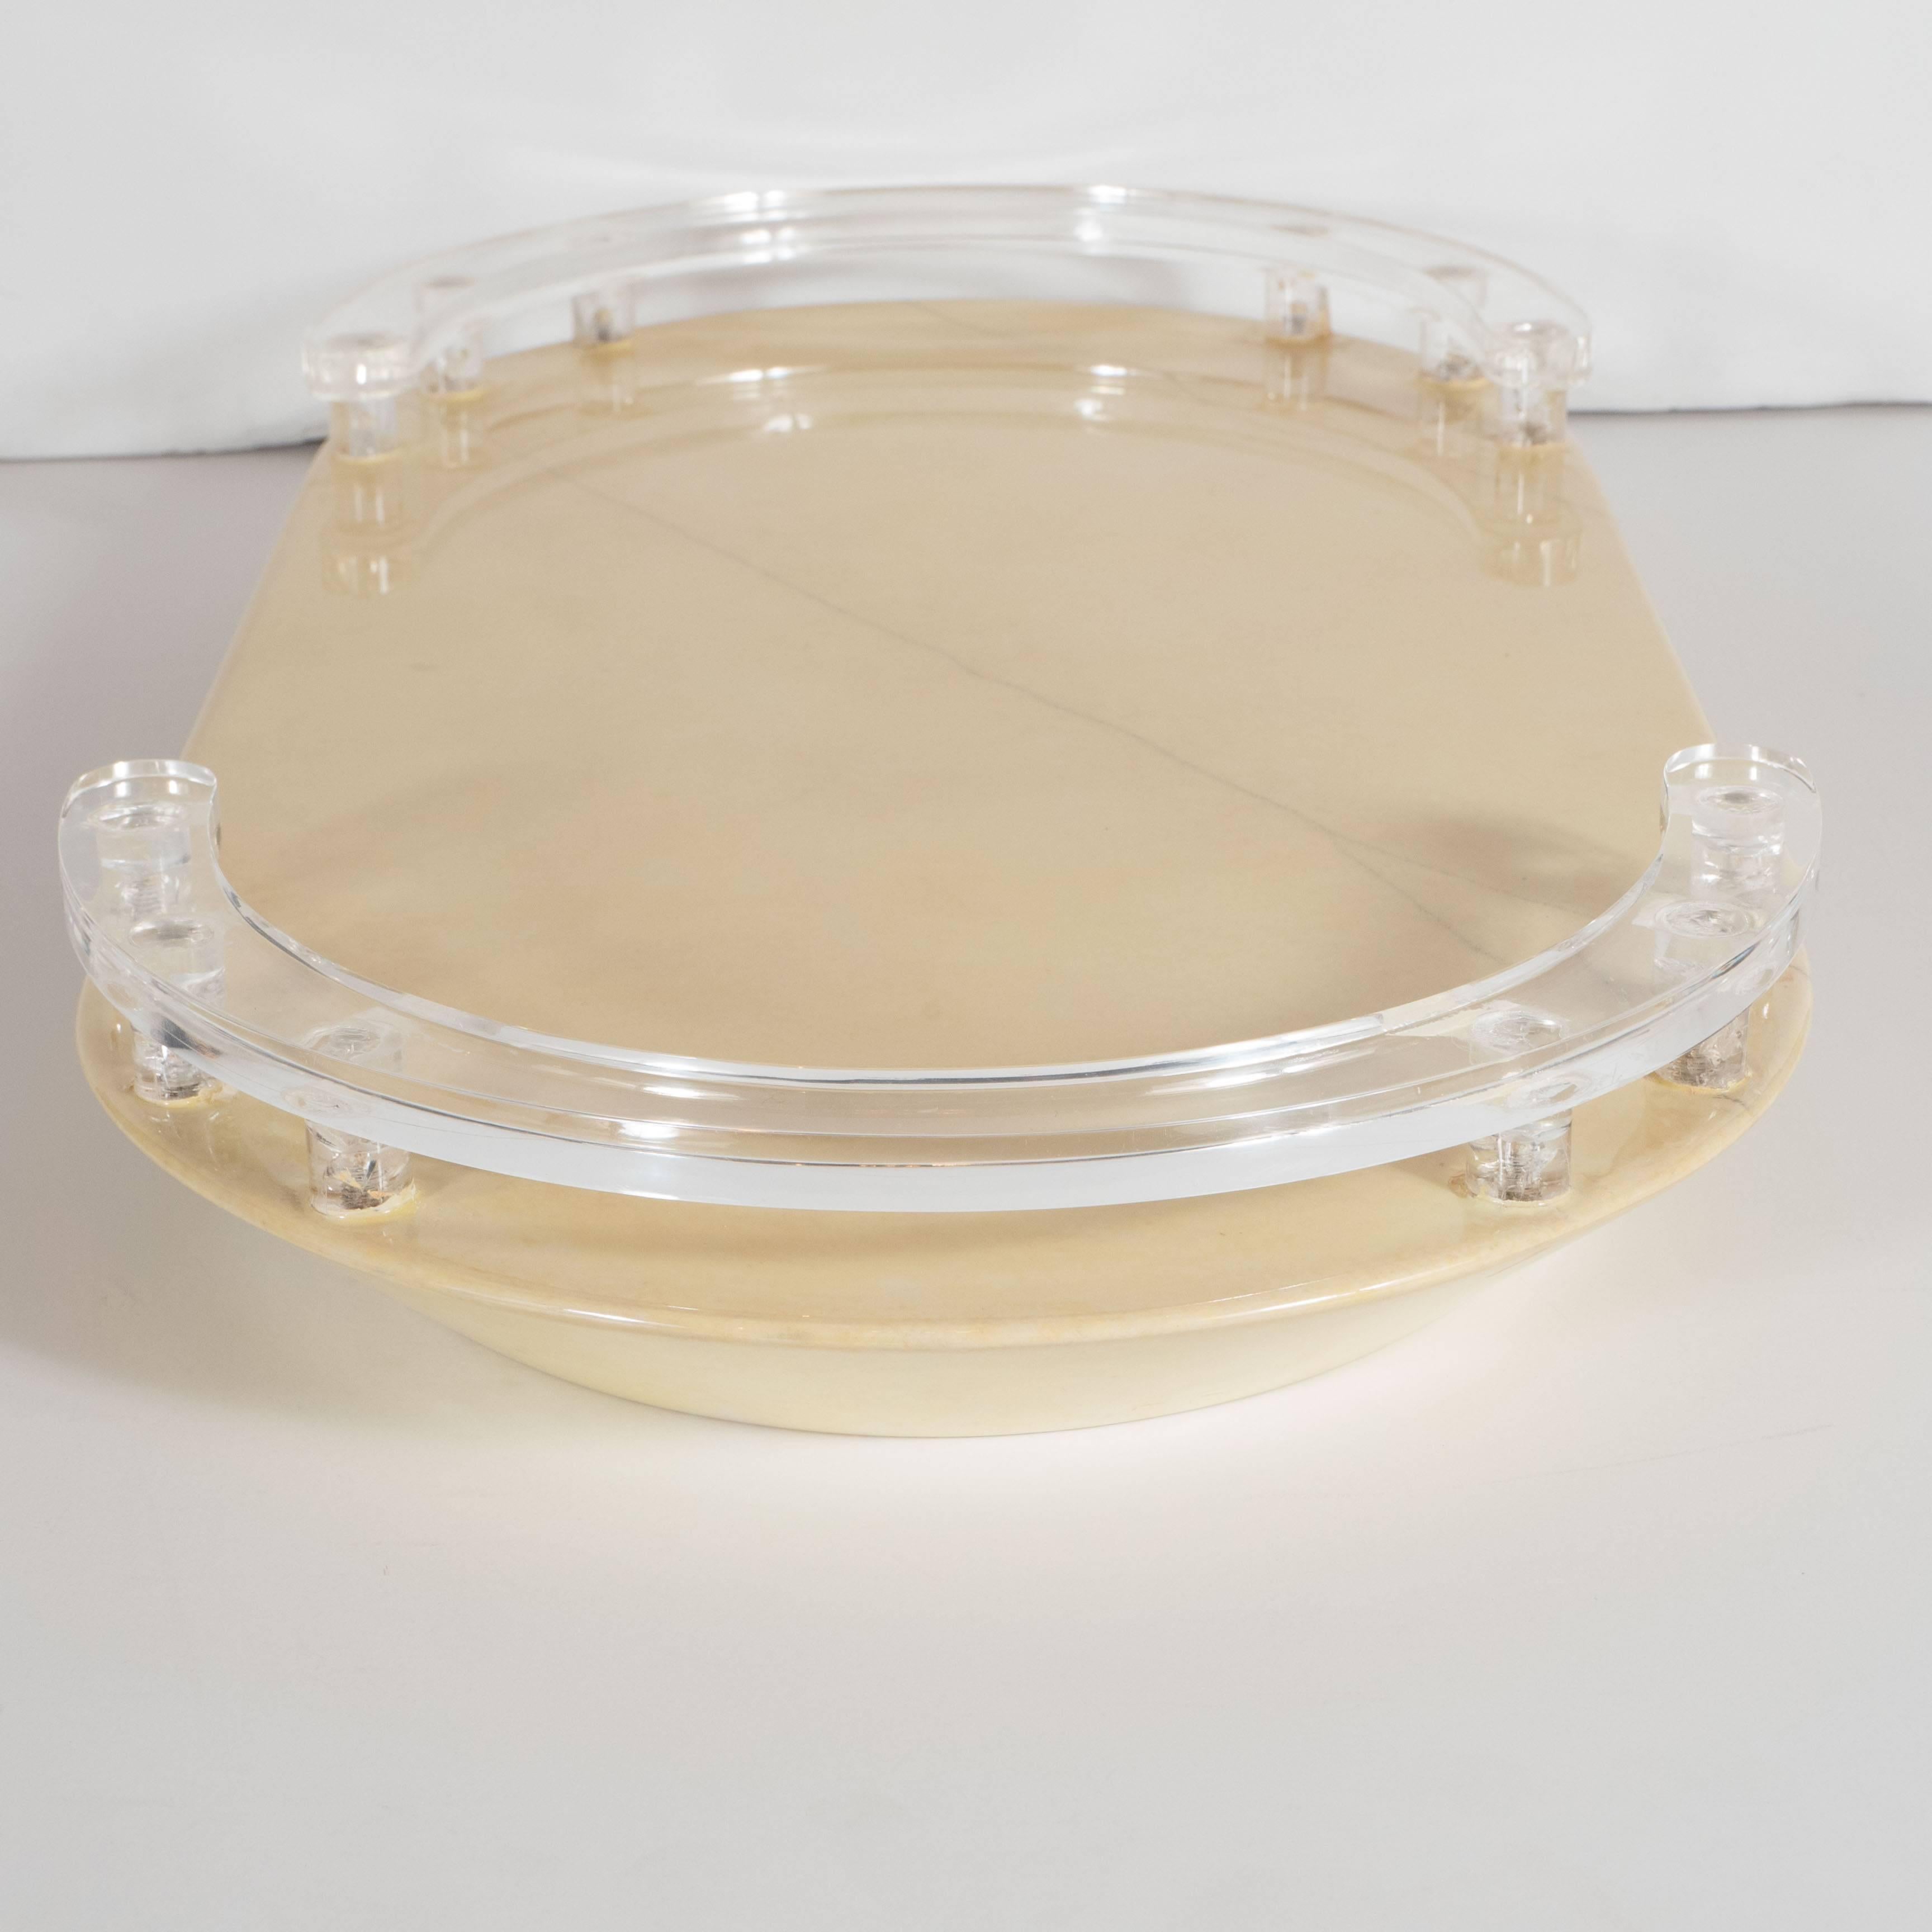 Late 20th Century Mid-Century Modernist Lacquered Goatskin and Lucite Tray